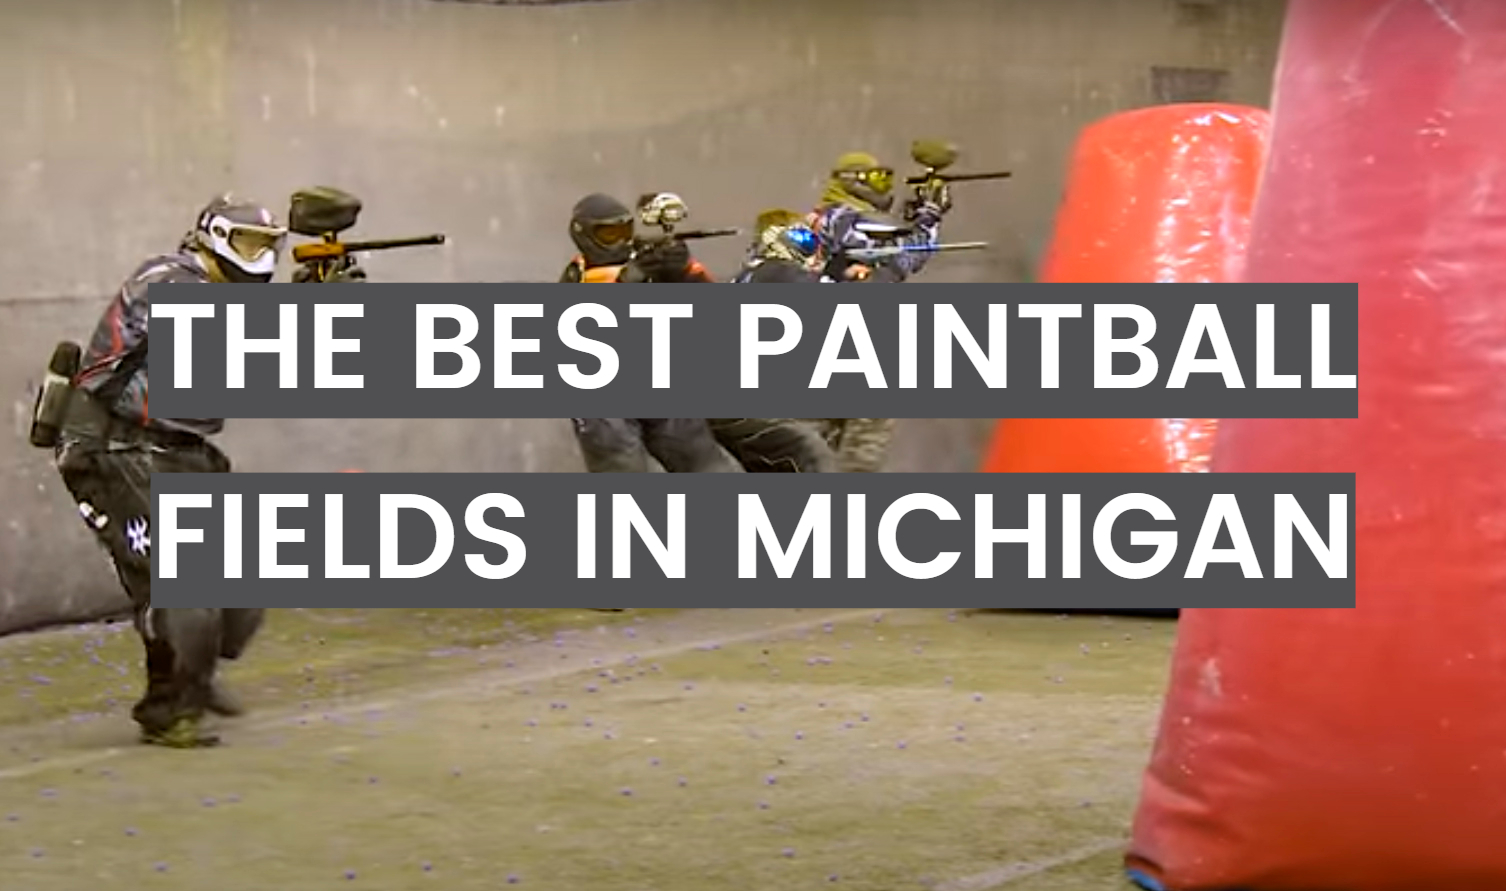 The Best Paintball Fields in Michigan